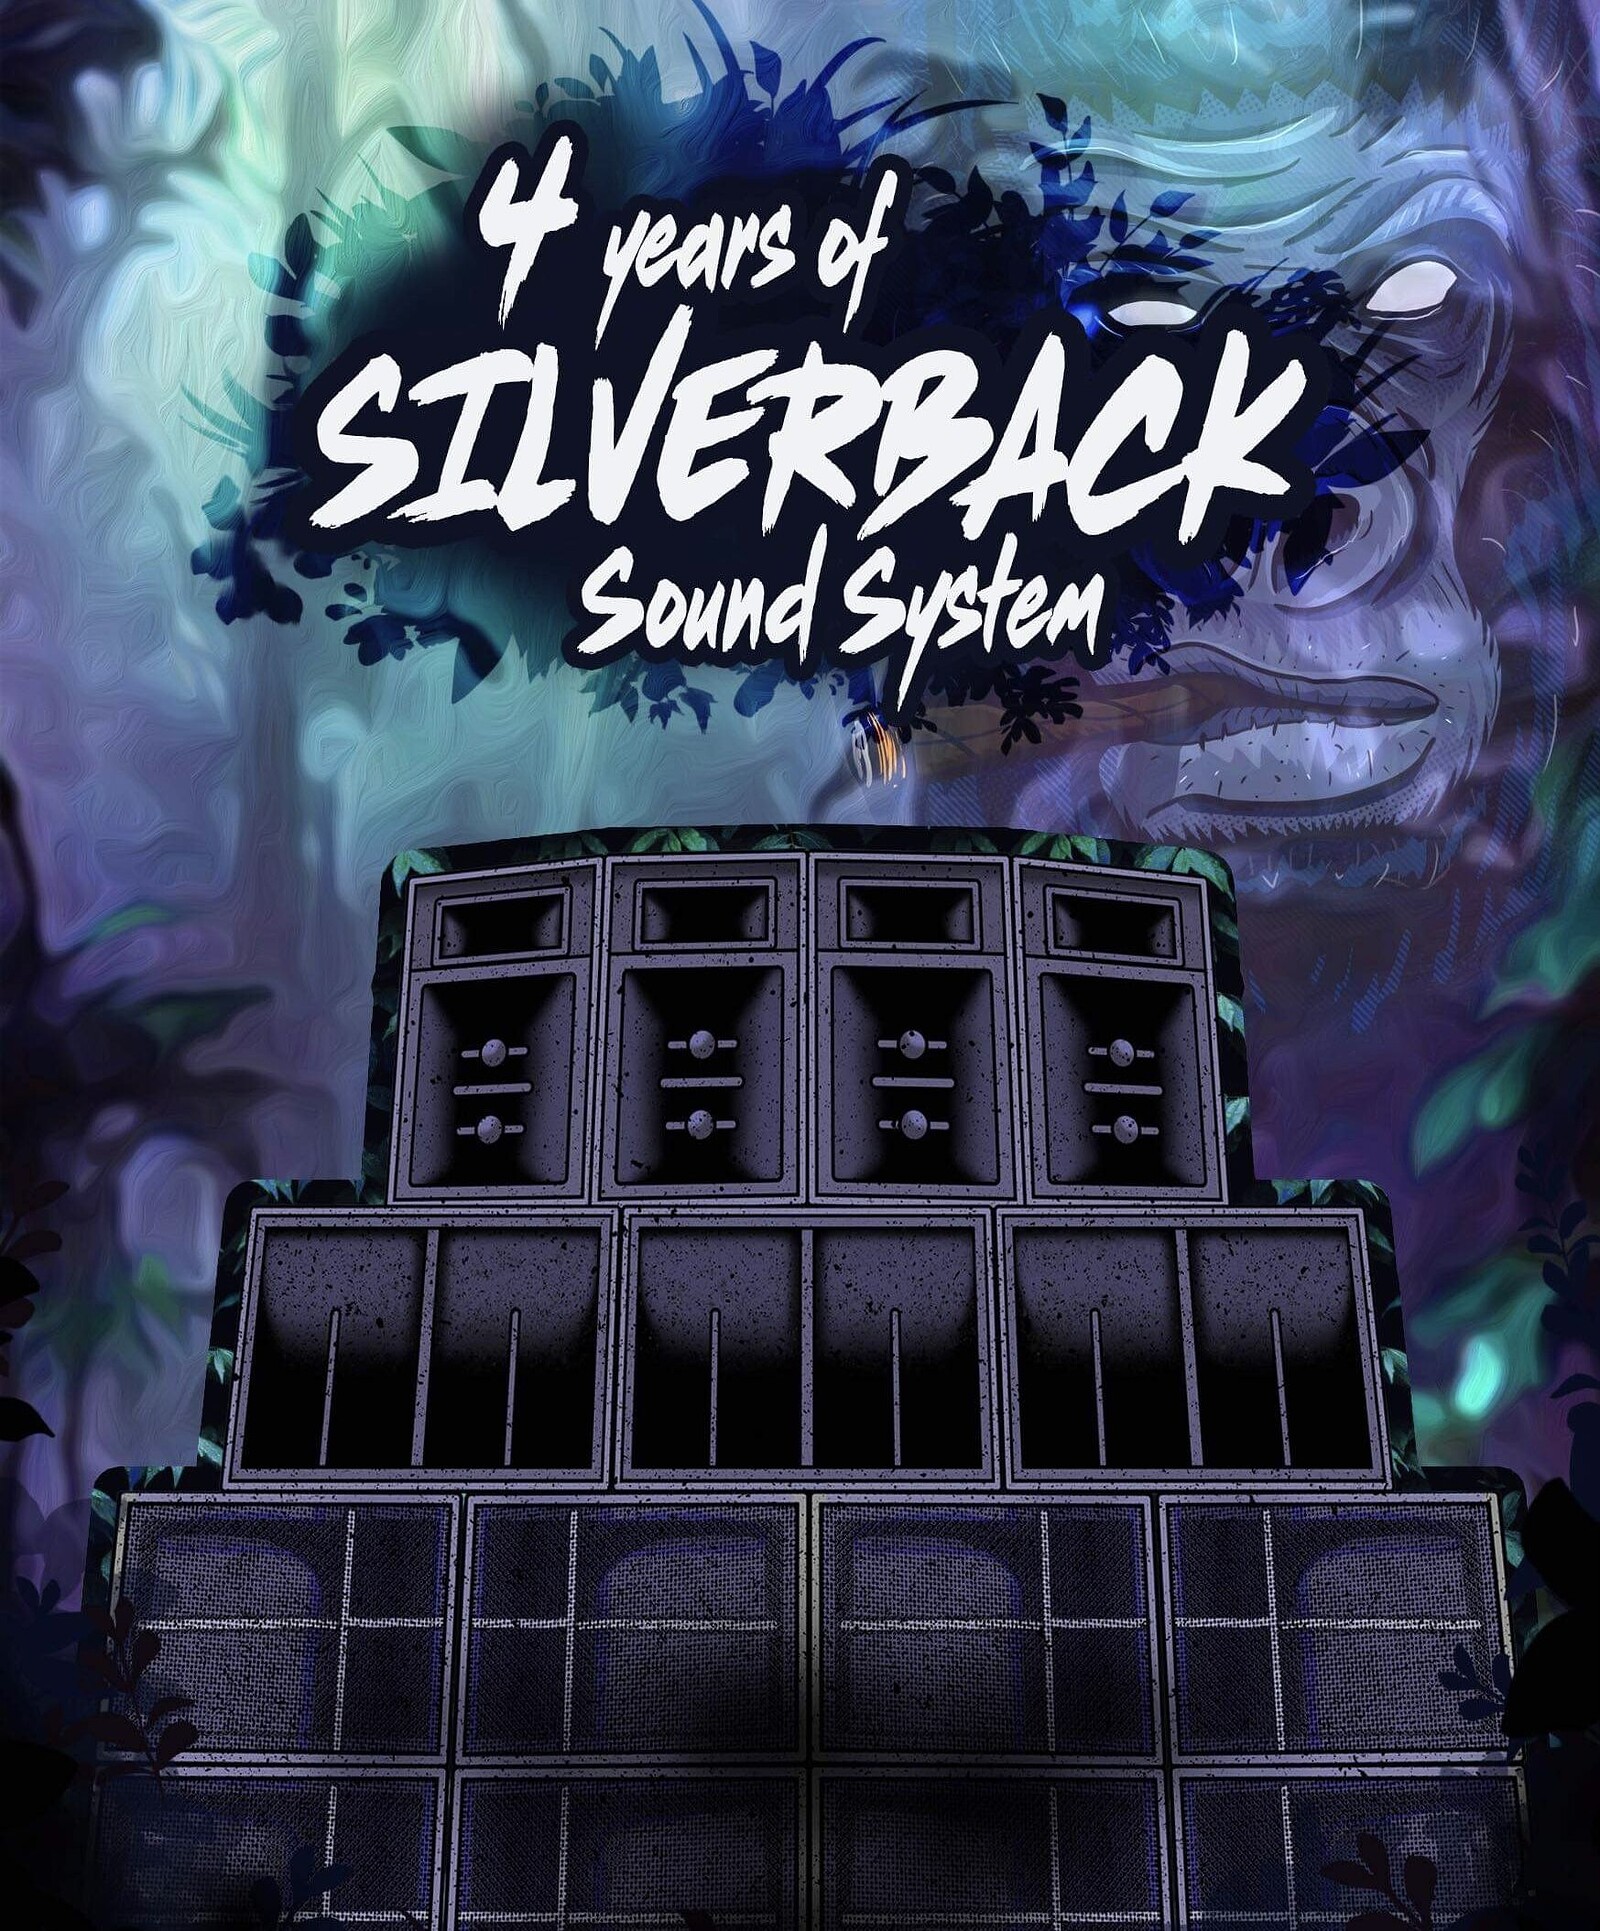 4 YEARS OF SILVERBACK SOUND SYSTEM at Green Works